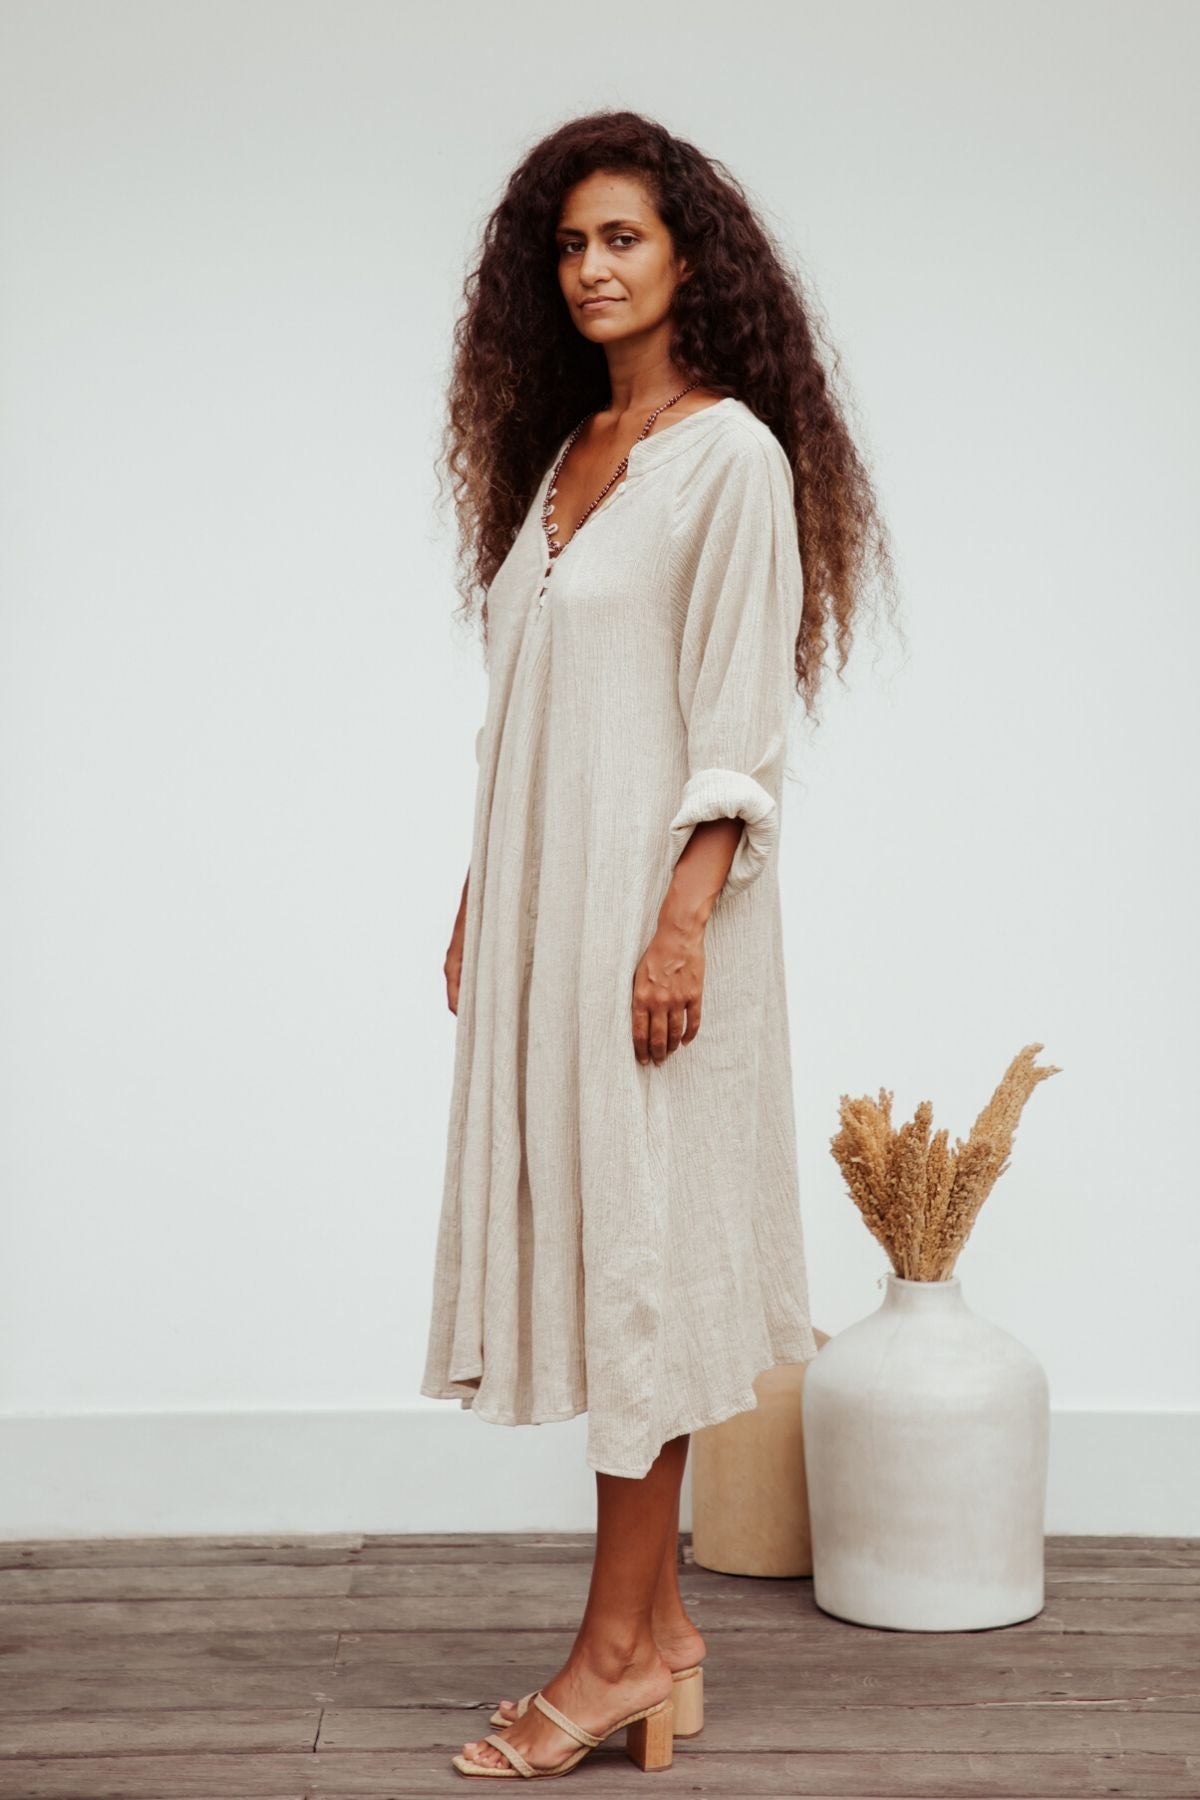 FRIDA Gown Short (100% Crinkle Linen Cotton, Light Flax) WI